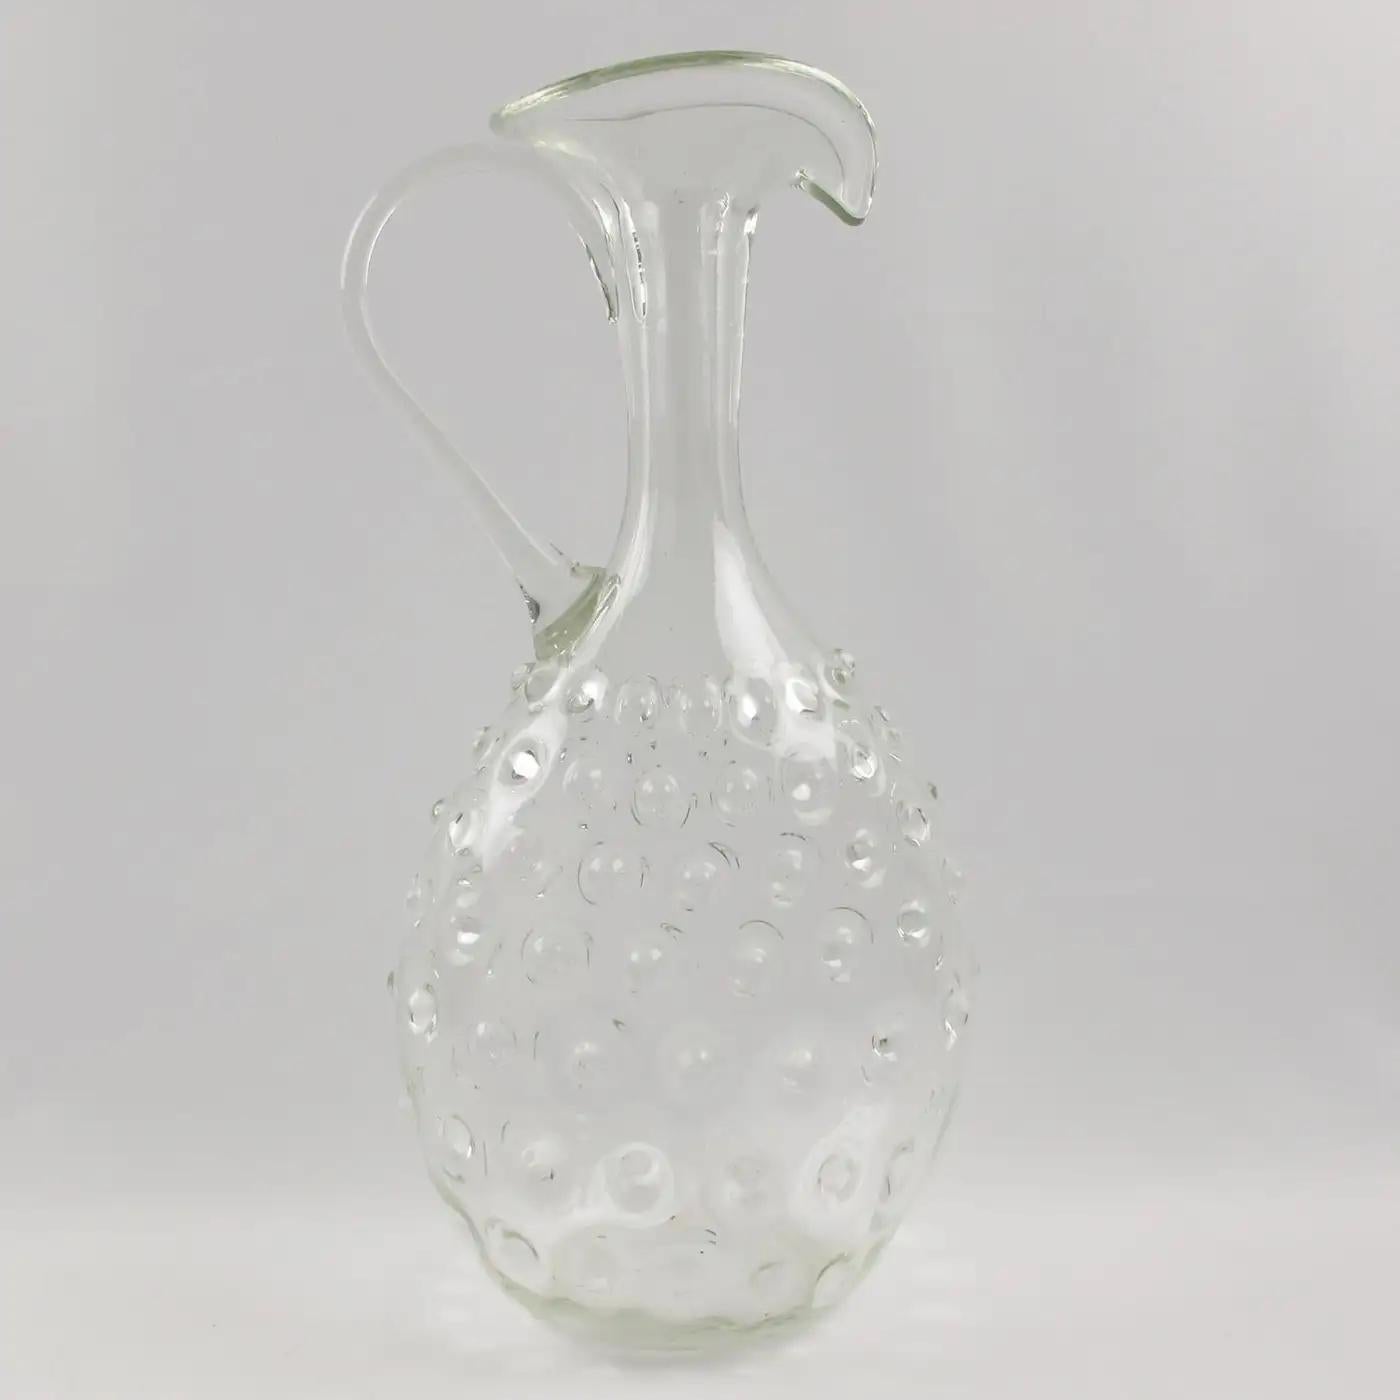 This stunning Empoli, Italy, hand-blown art glass pitcher or decanter is a gorgeous piece of Italian craftsmanship. This tall pitcher features an Etruscan shape with a hobnail pattern and was hand-crafted in Murano, Italy, circa 1950. It is the